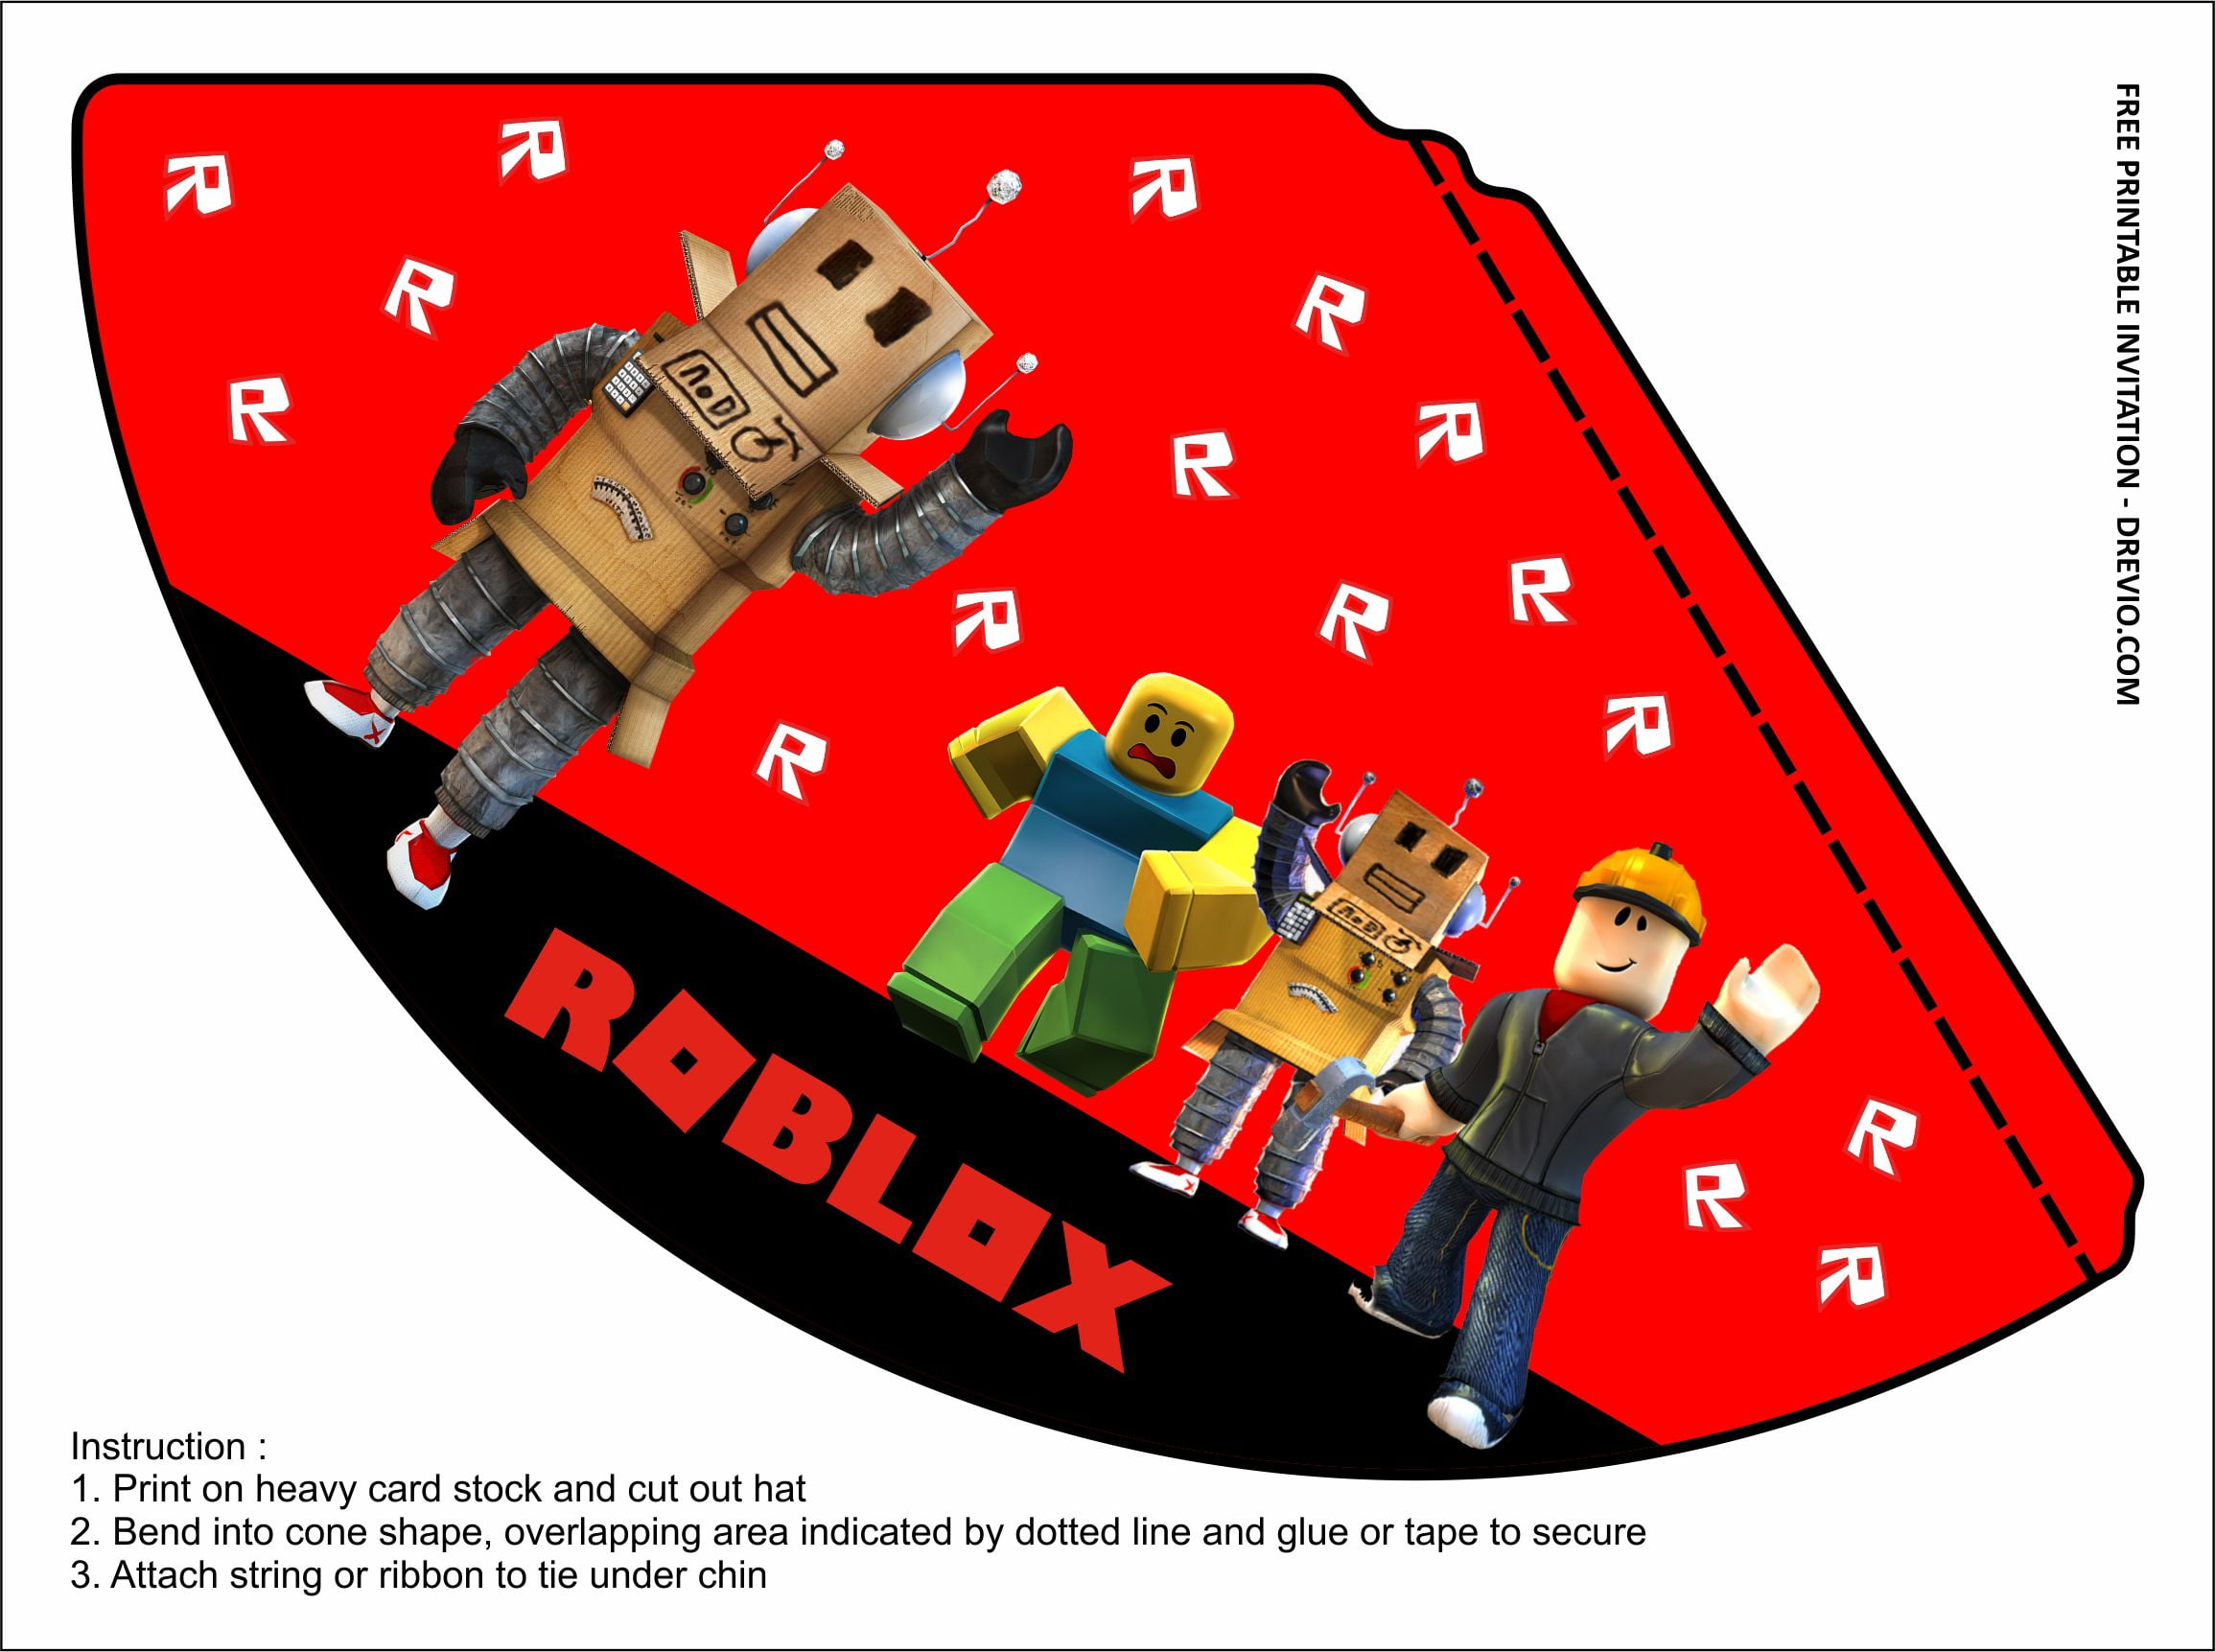 How To Get Any Hat On Roblox For Free 2019 لم يسبق له مثيل الصور